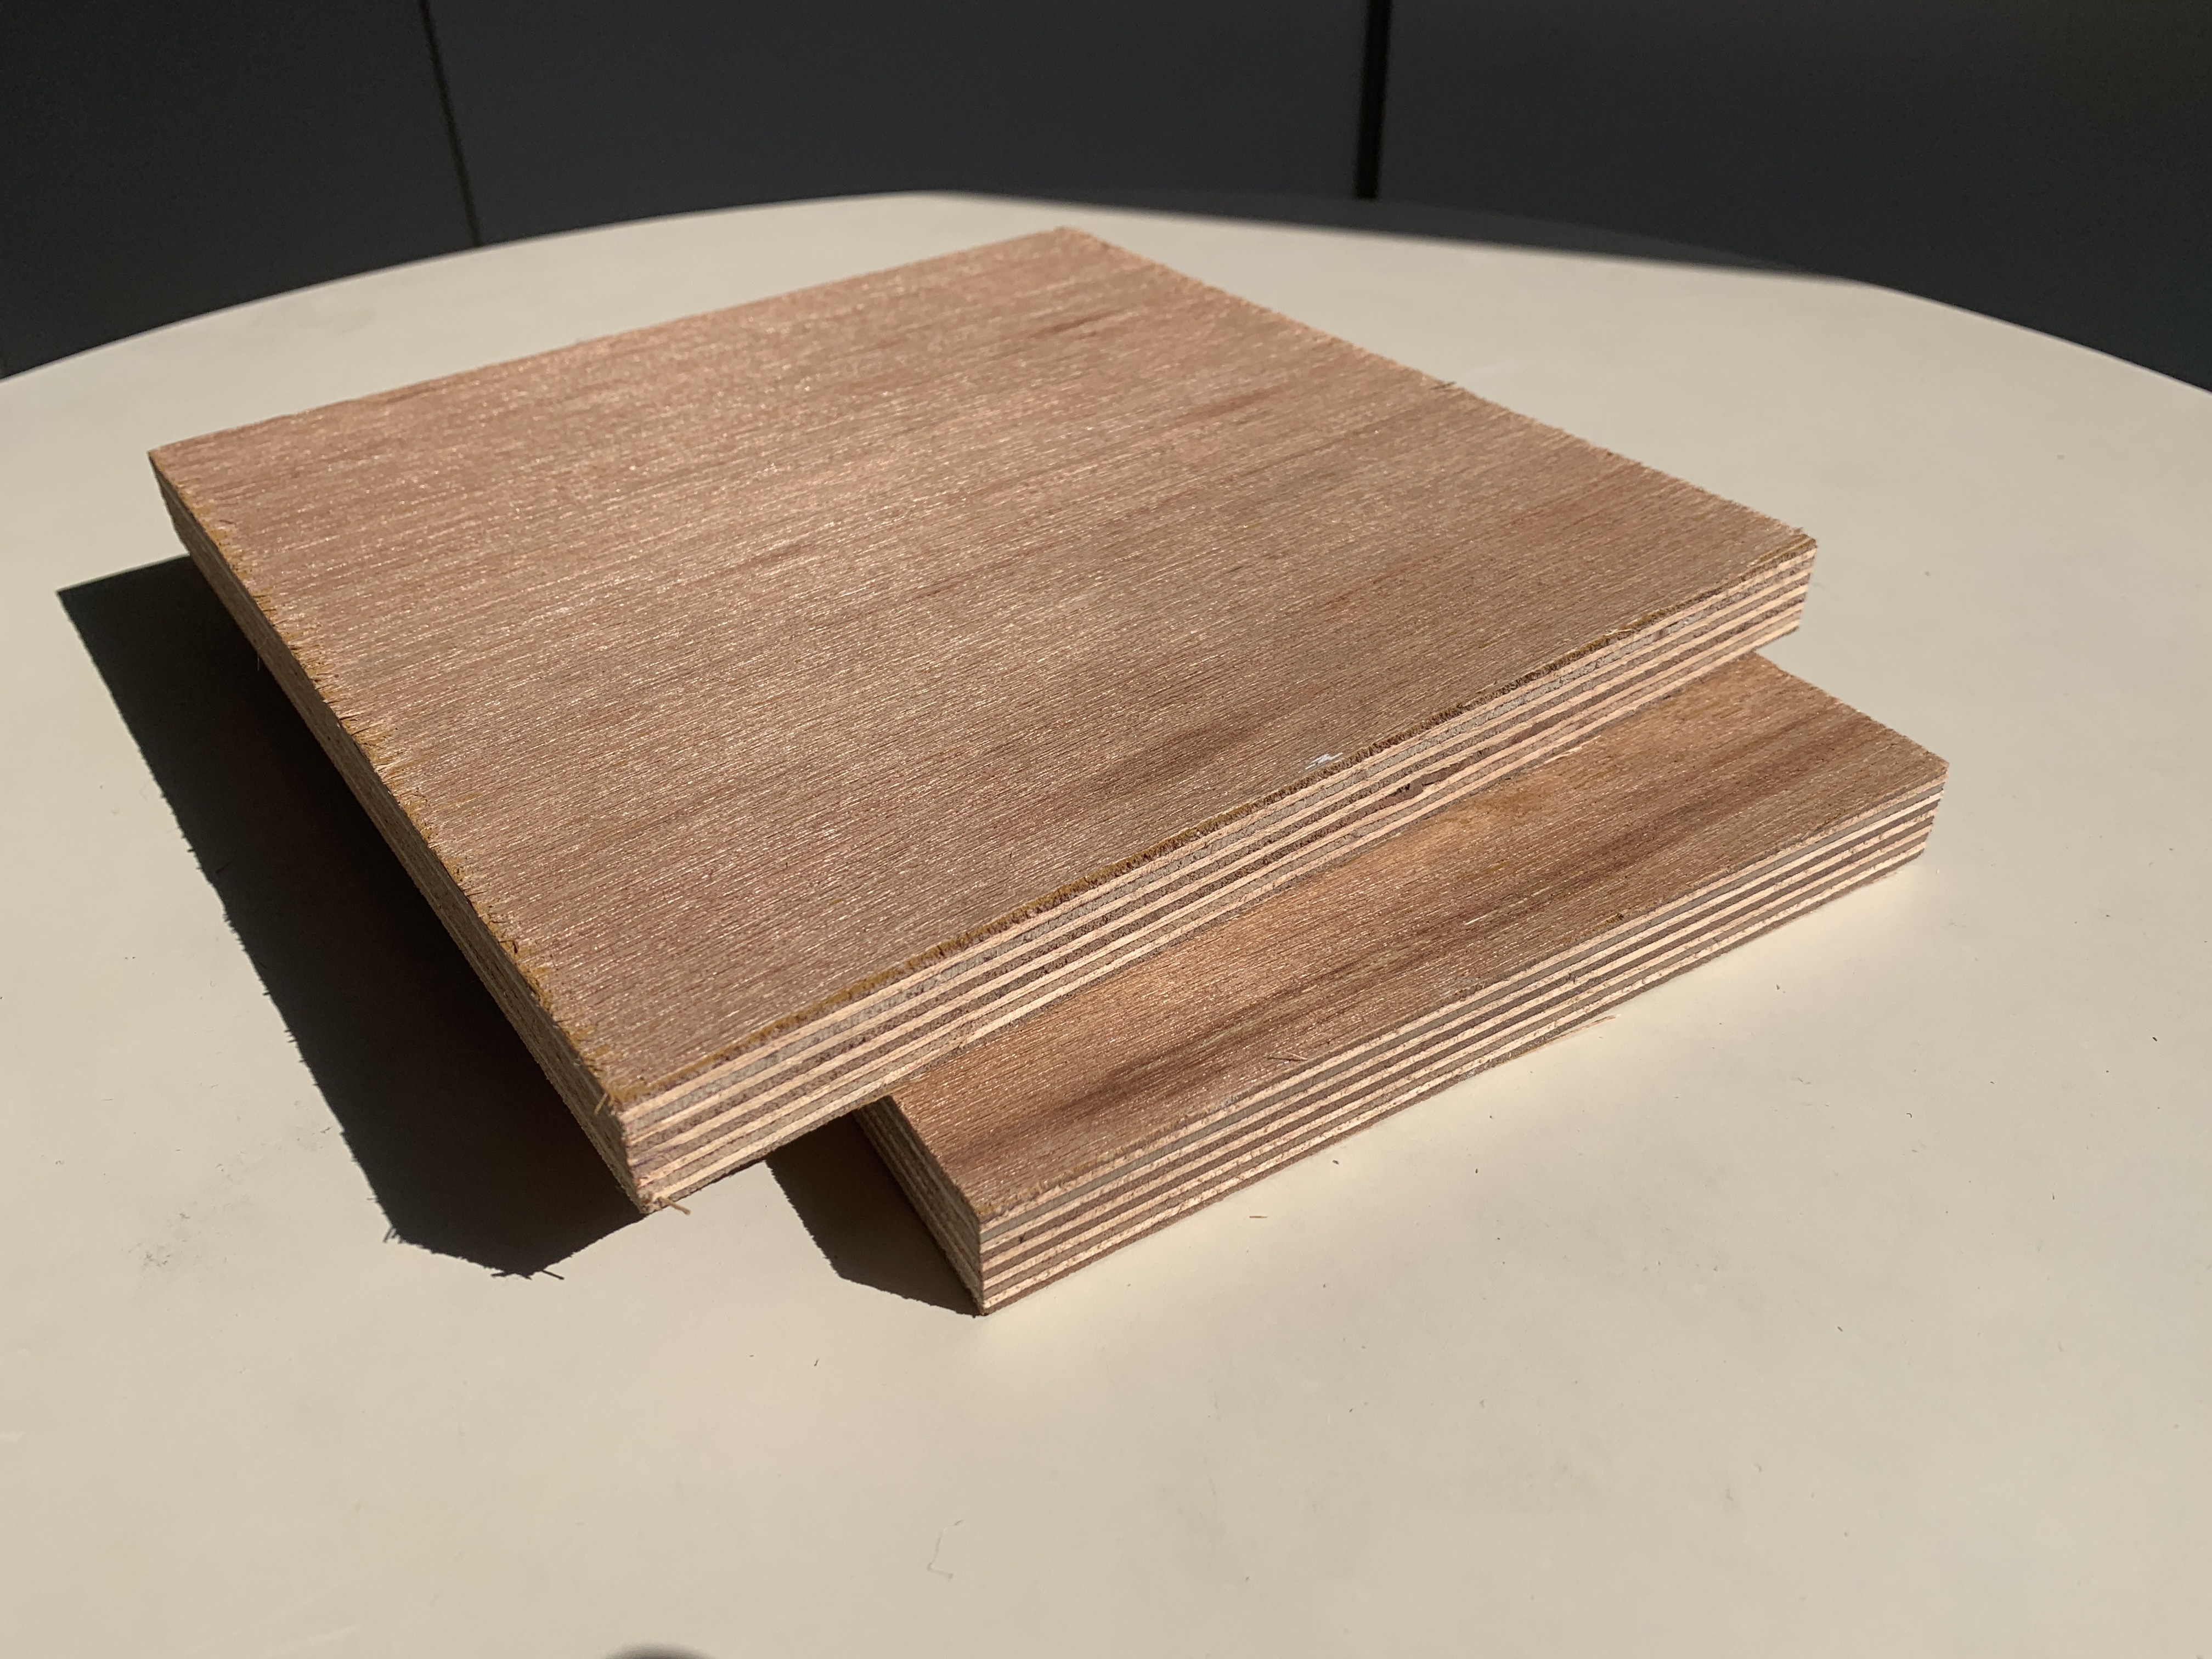 Description of the Details of Plywood